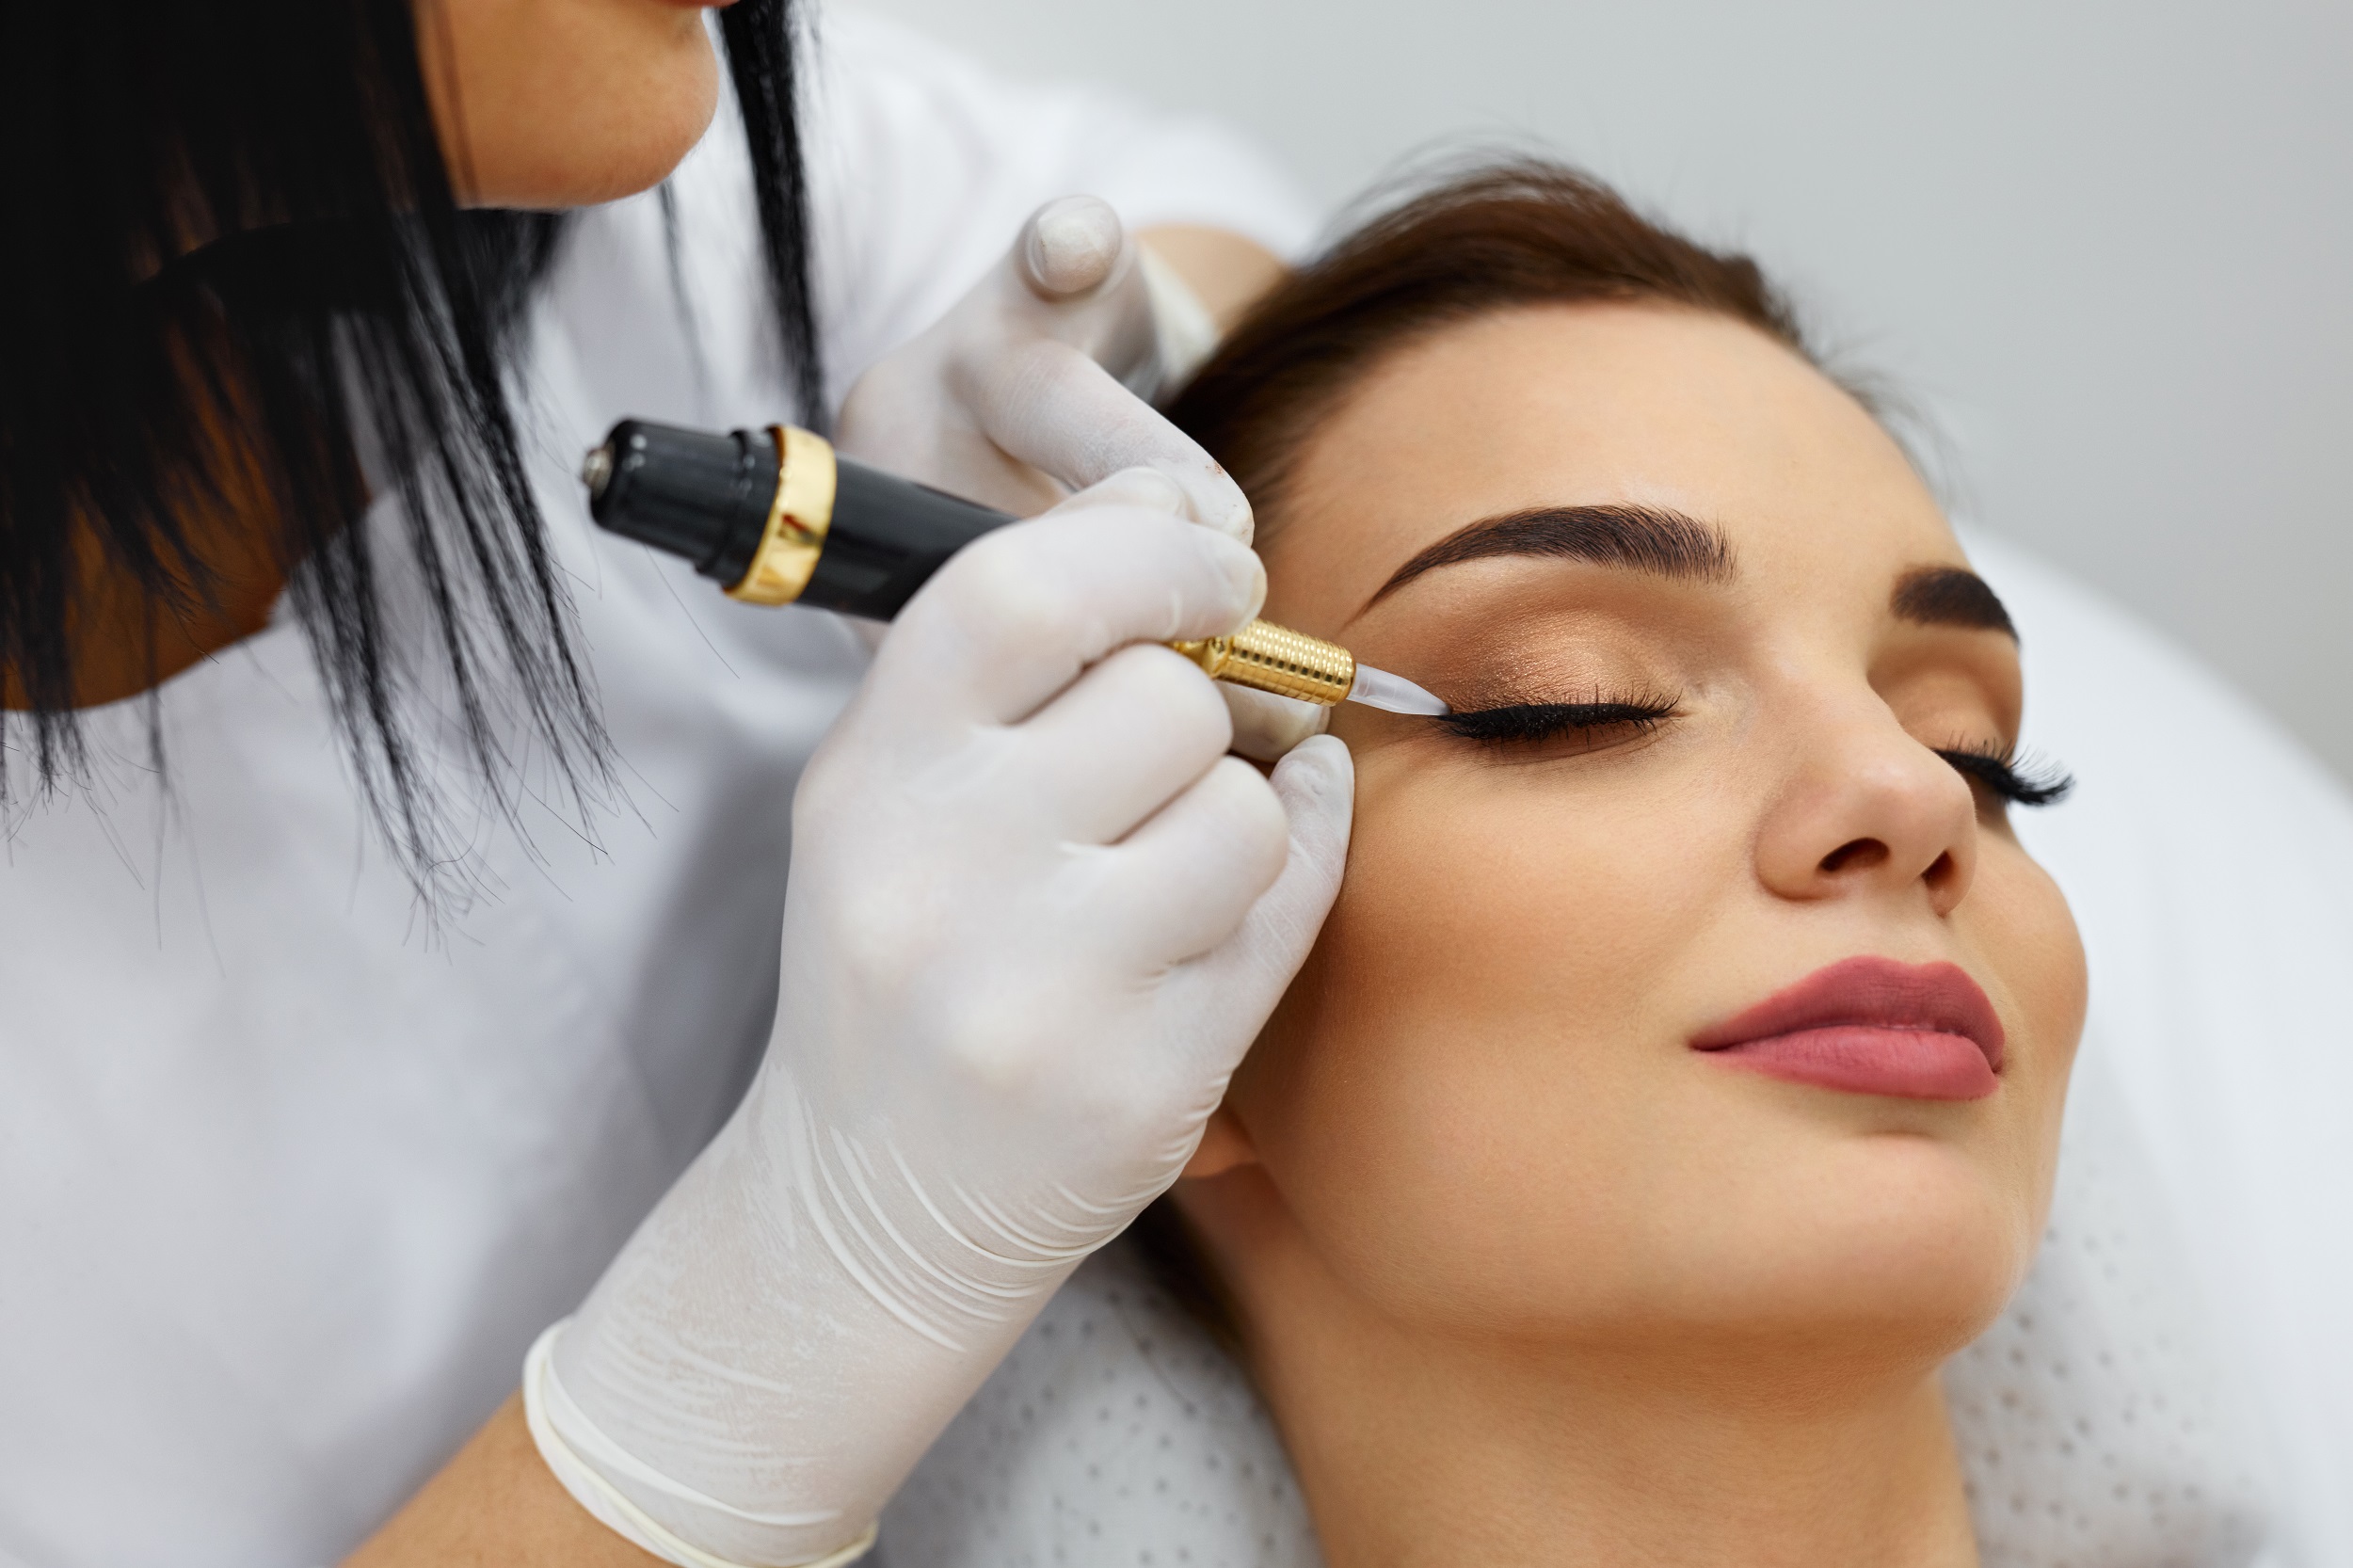 Eyebrow Tattoos & Microblading - Cosmetic Tattooing, Microblading, Scalp  Micropigmentation, Medical Aesthetics, and Body Art Tattooing & Piercing in  Turnersville, NJ